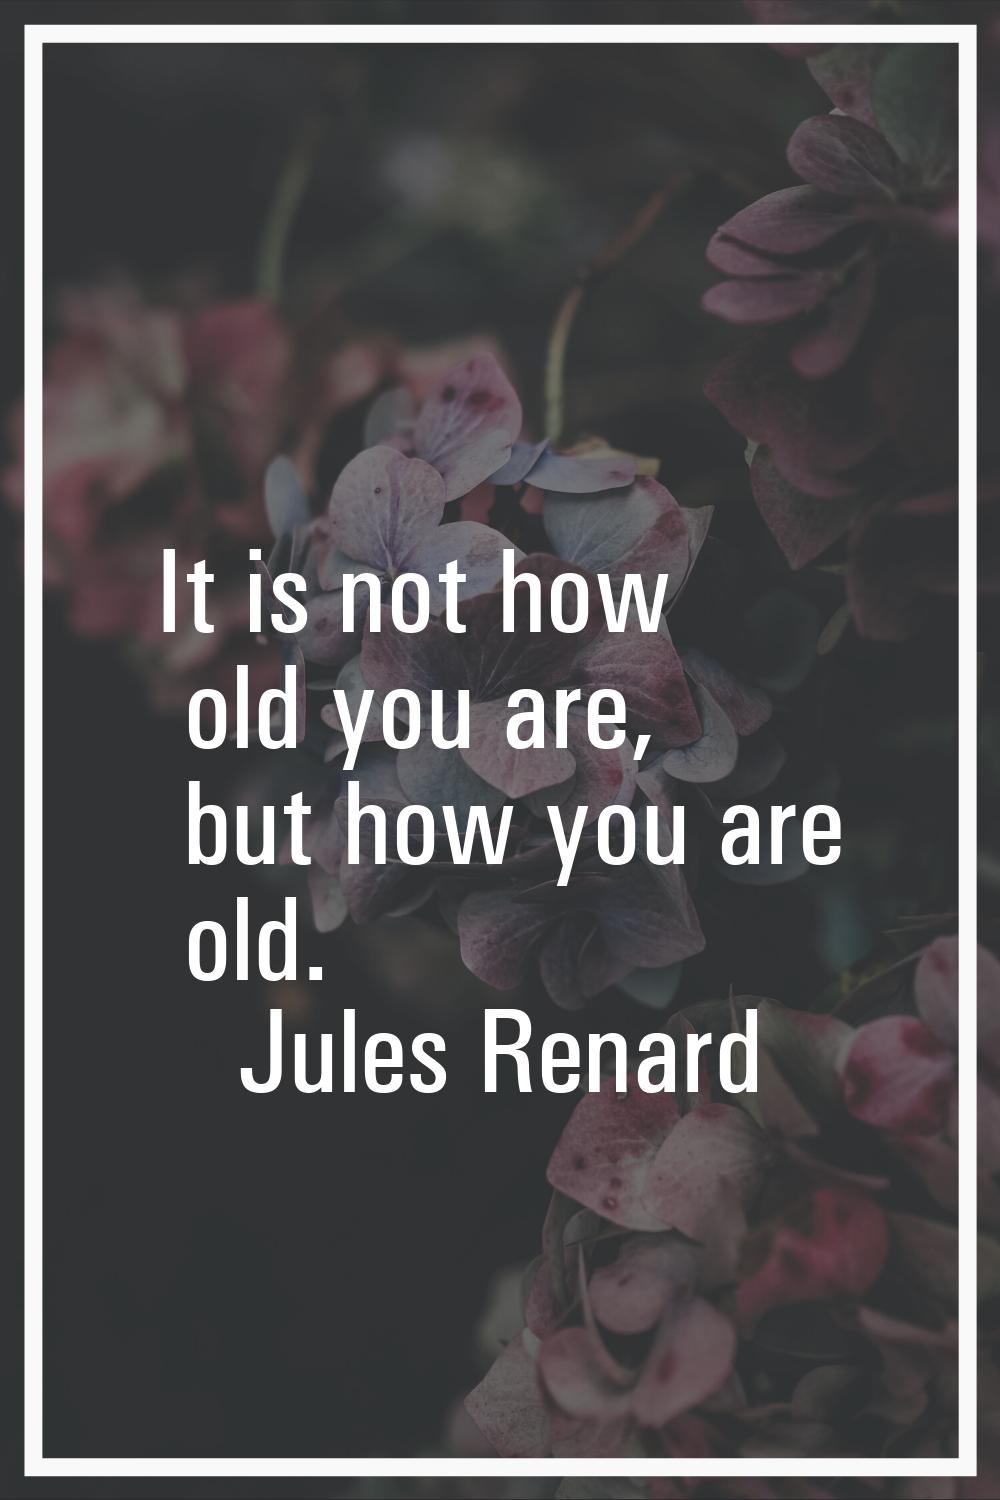 It is not how old you are, but how you are old.